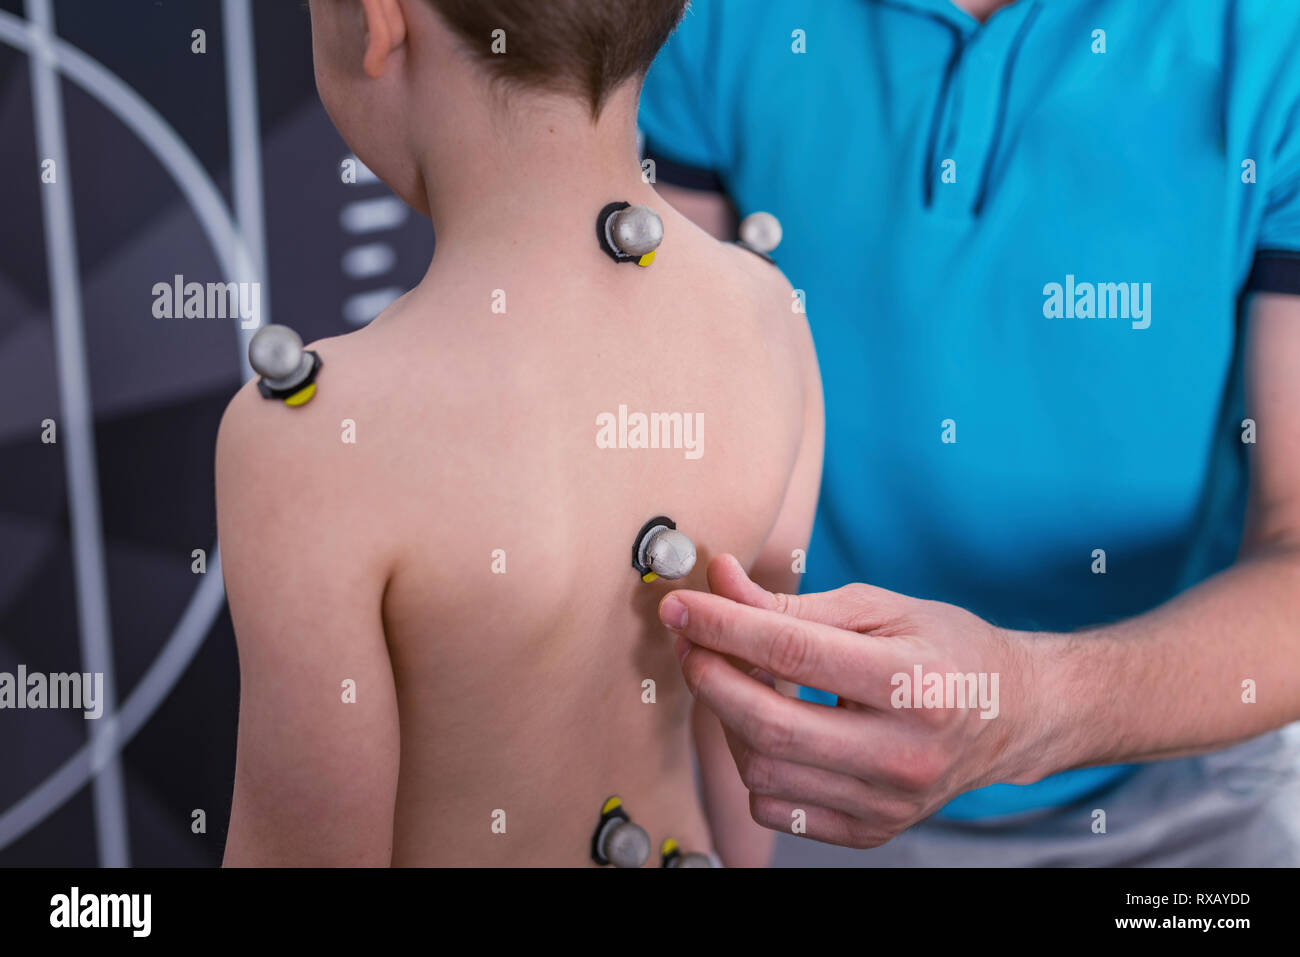 Placing markers for posture analysis Stock Photo